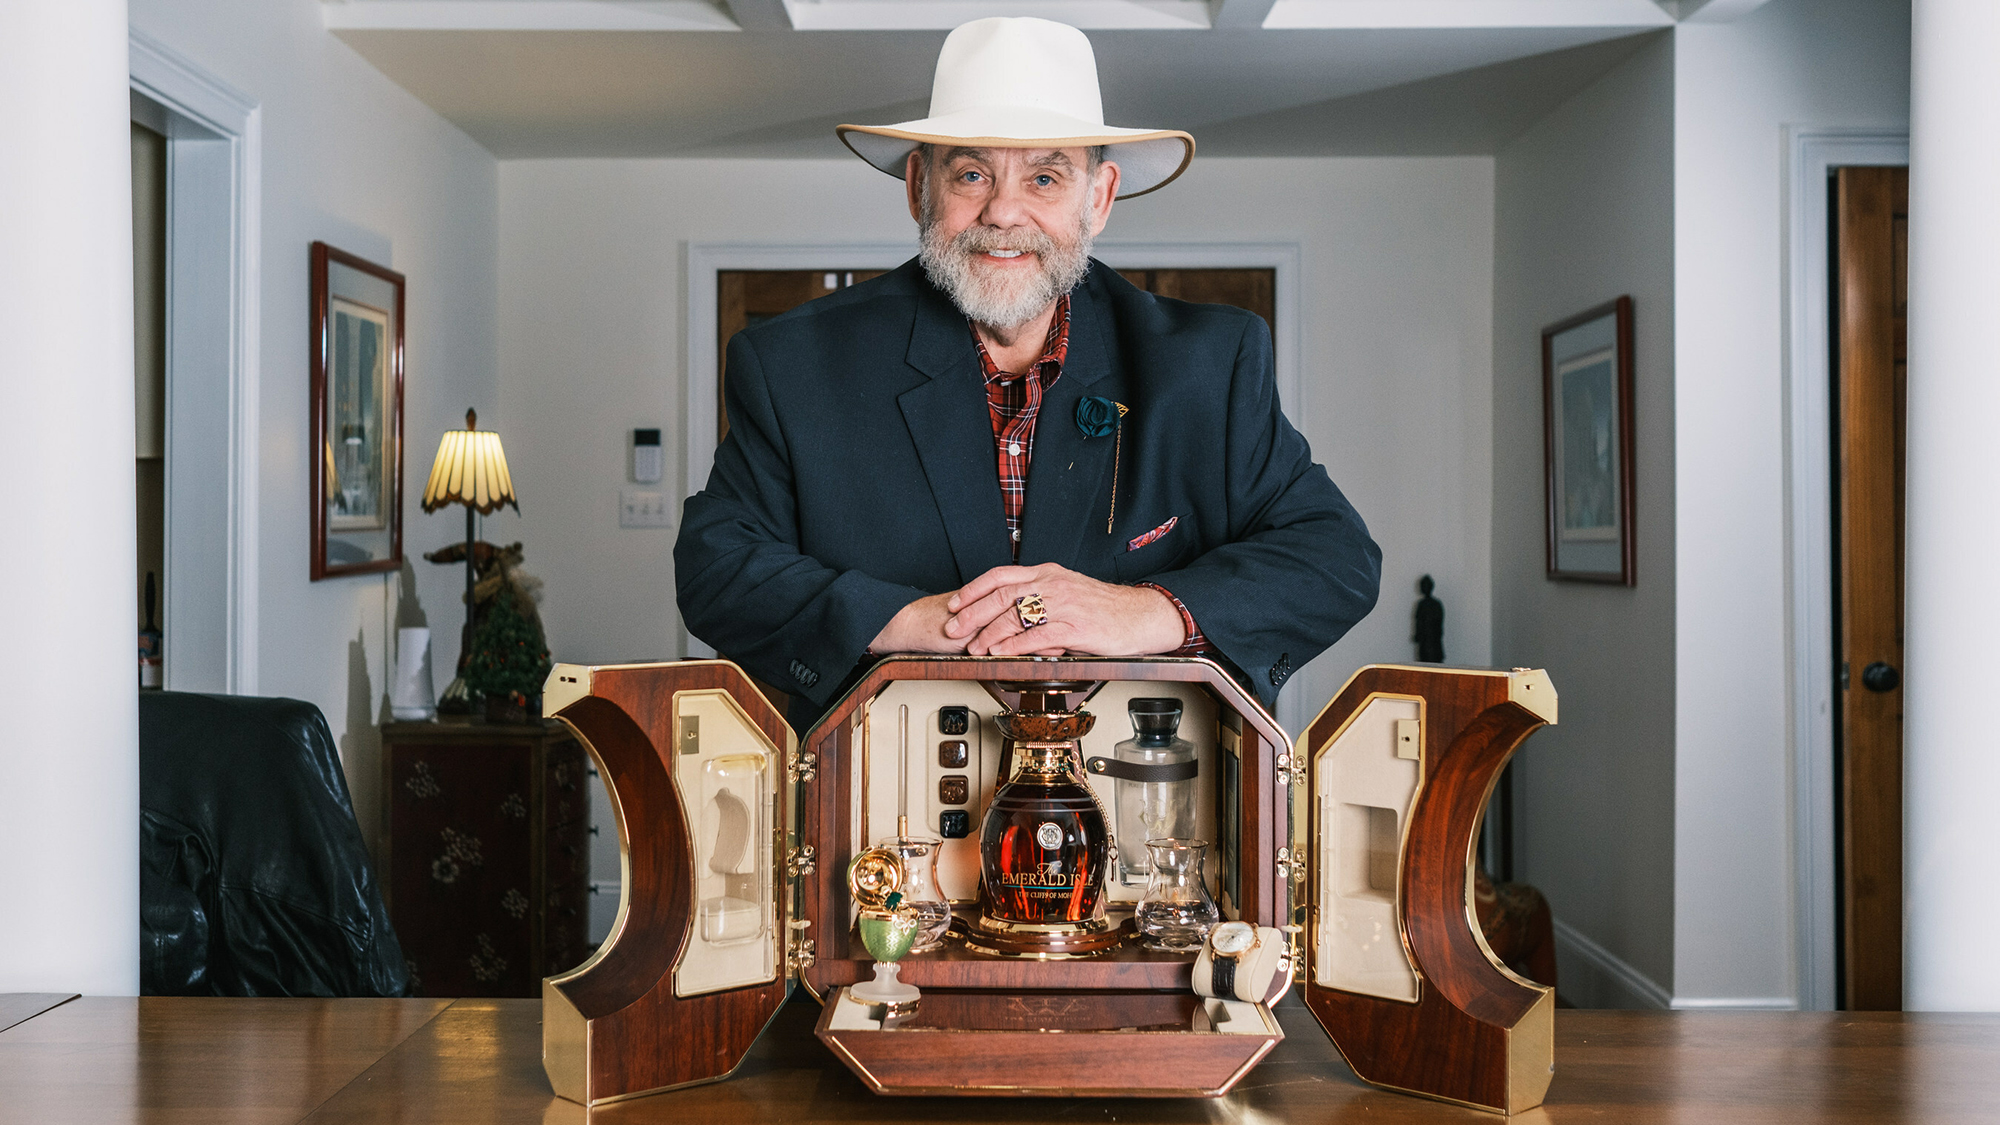 Mike Daley and The Emerald Isle, the most expensive bottle of whiskey ever sold